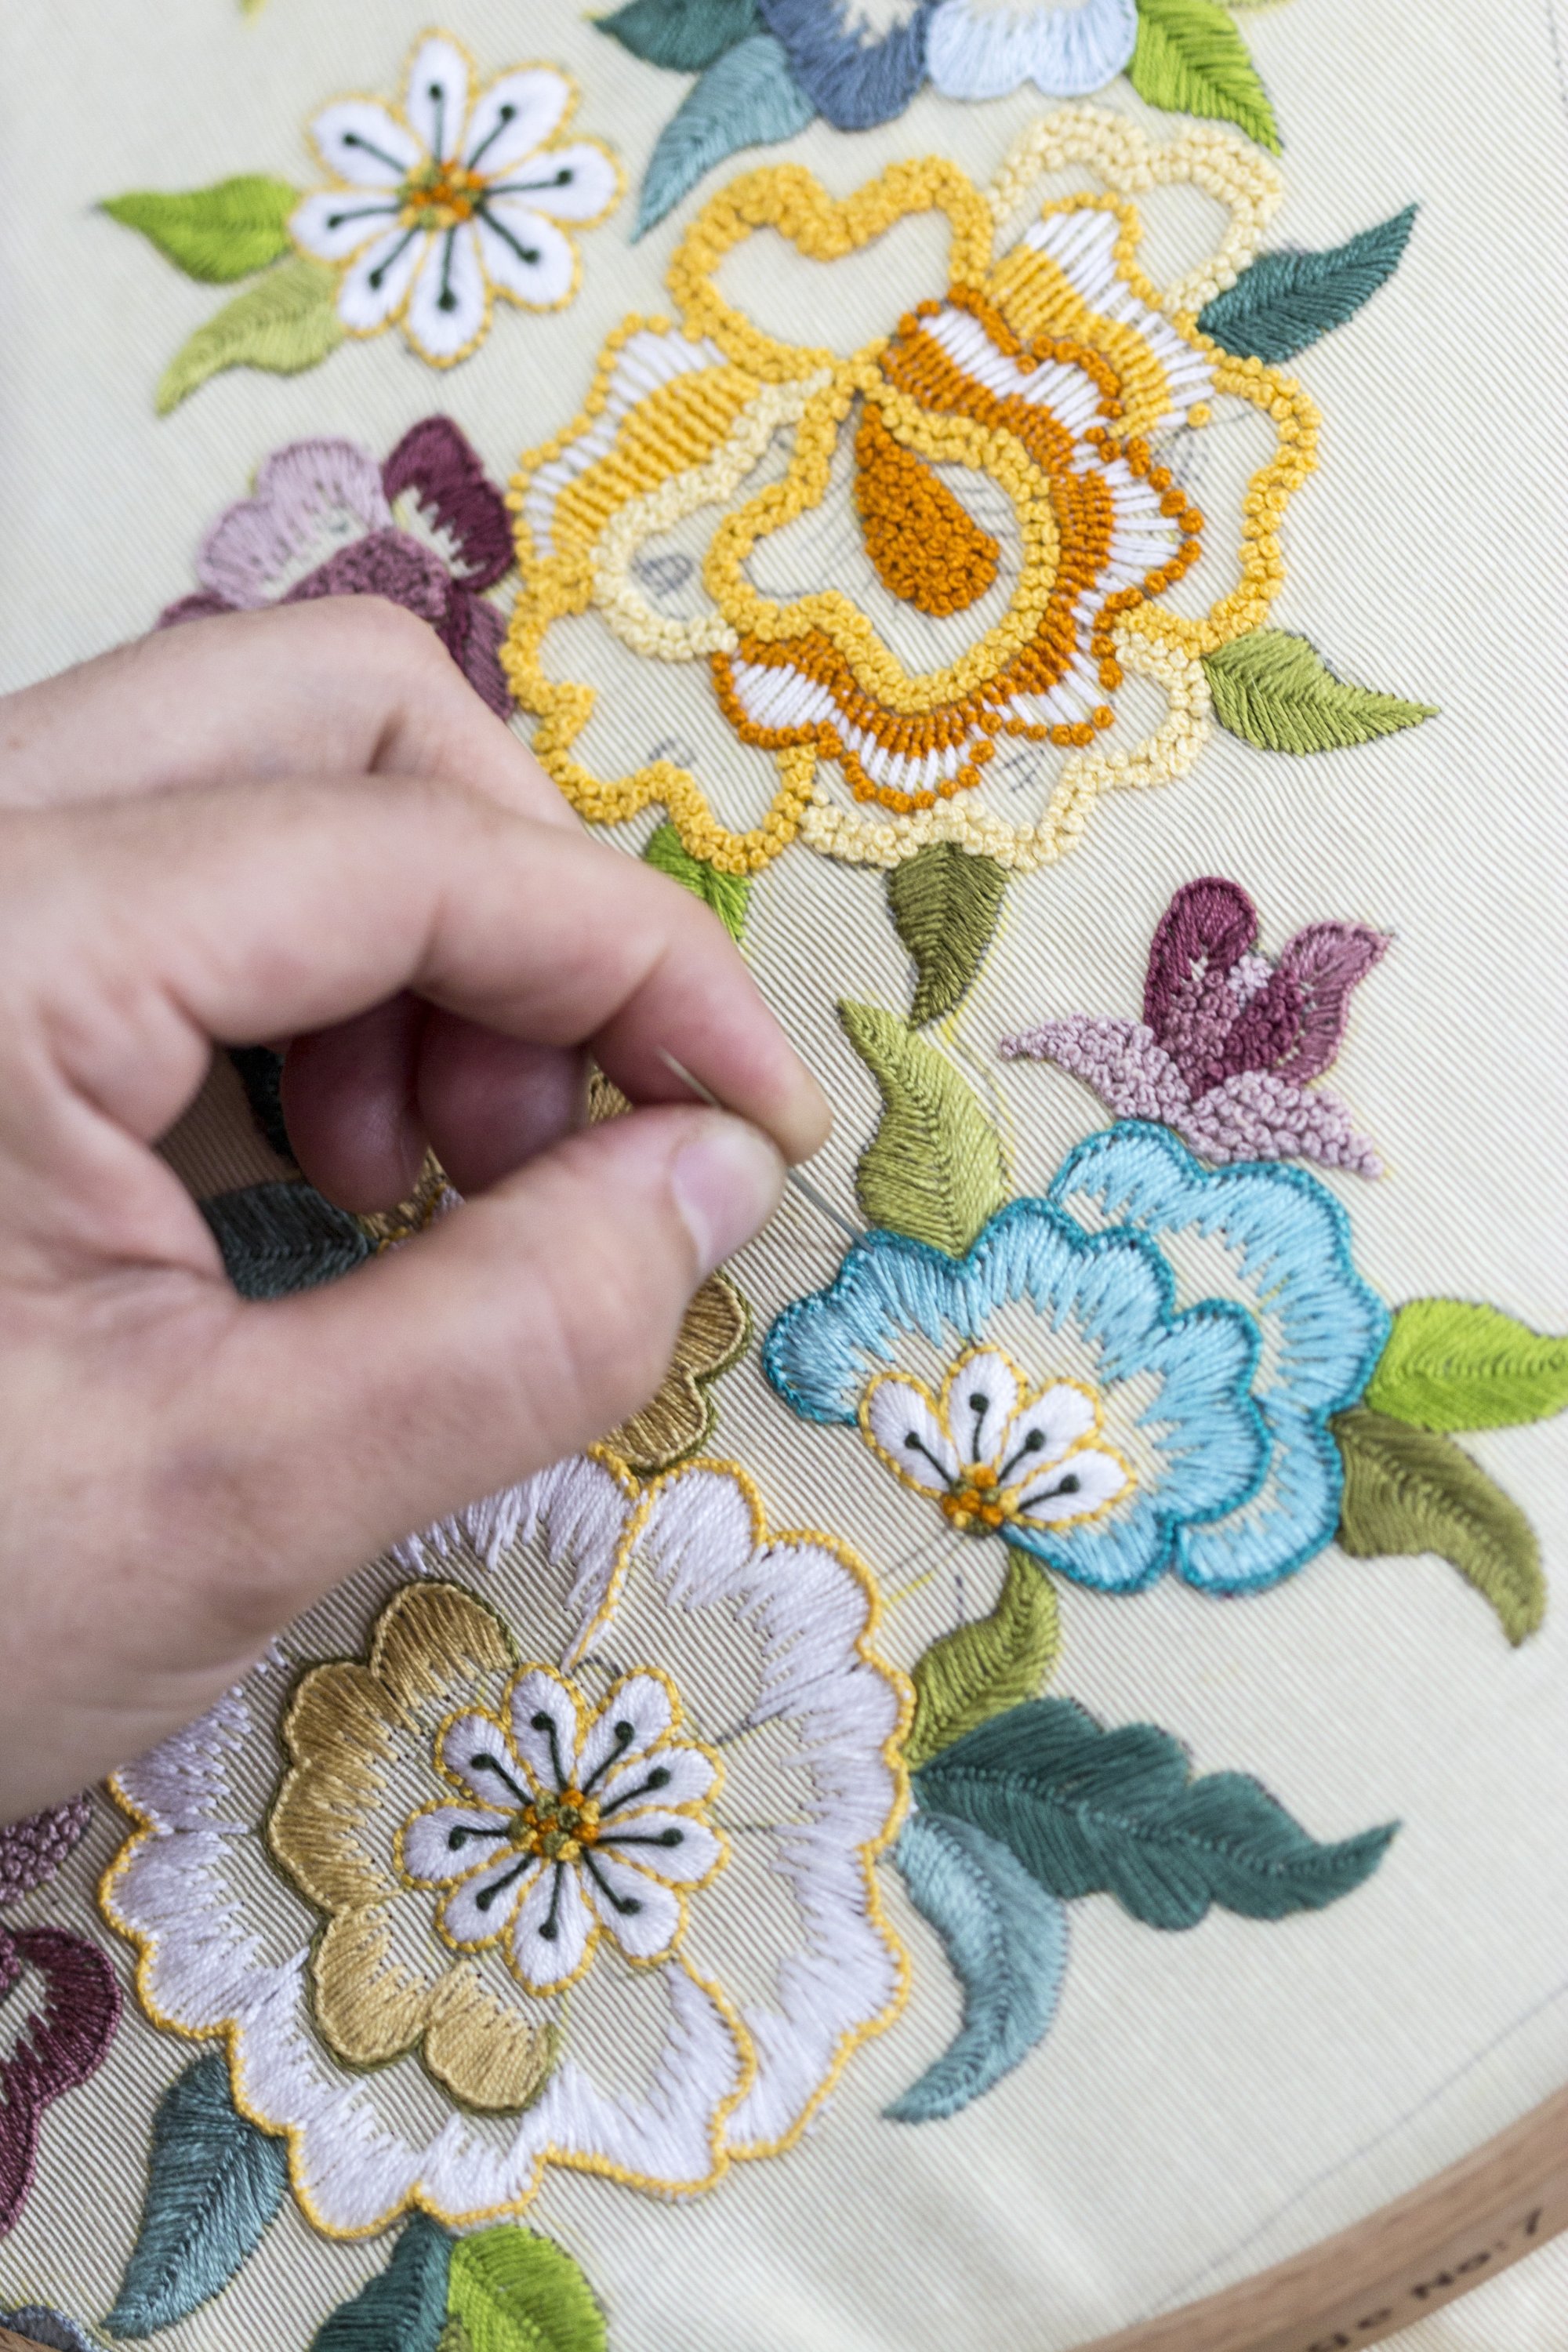 A woman applies Turkish embroidery detailing a floral motif on a piece of fabric. (Shutterstock Photo)